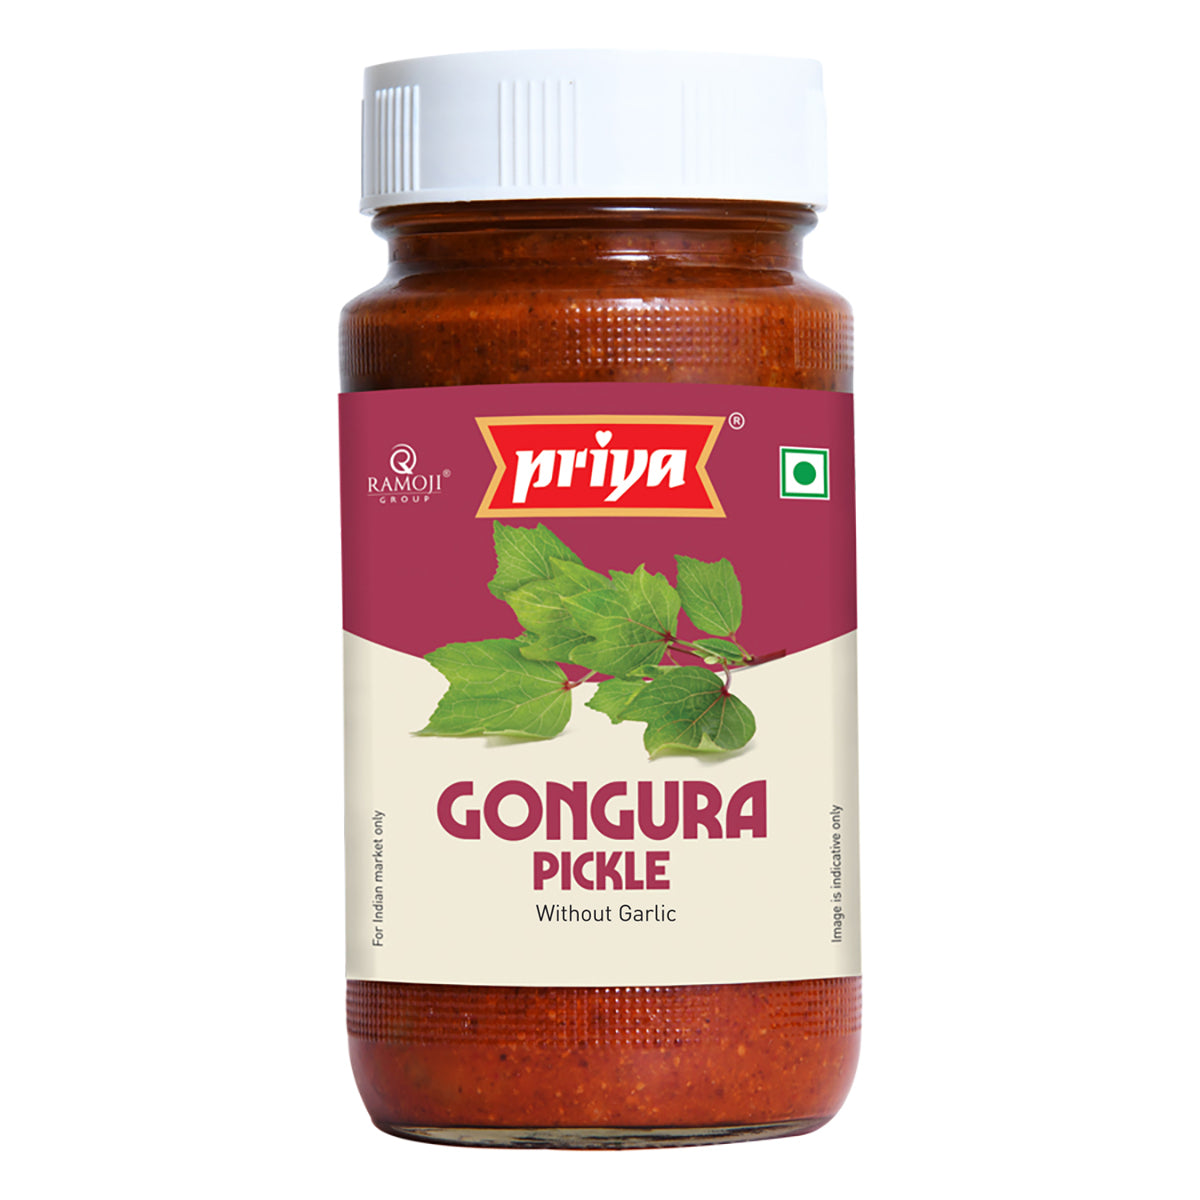 Gongura Pickle online without garlic  300g